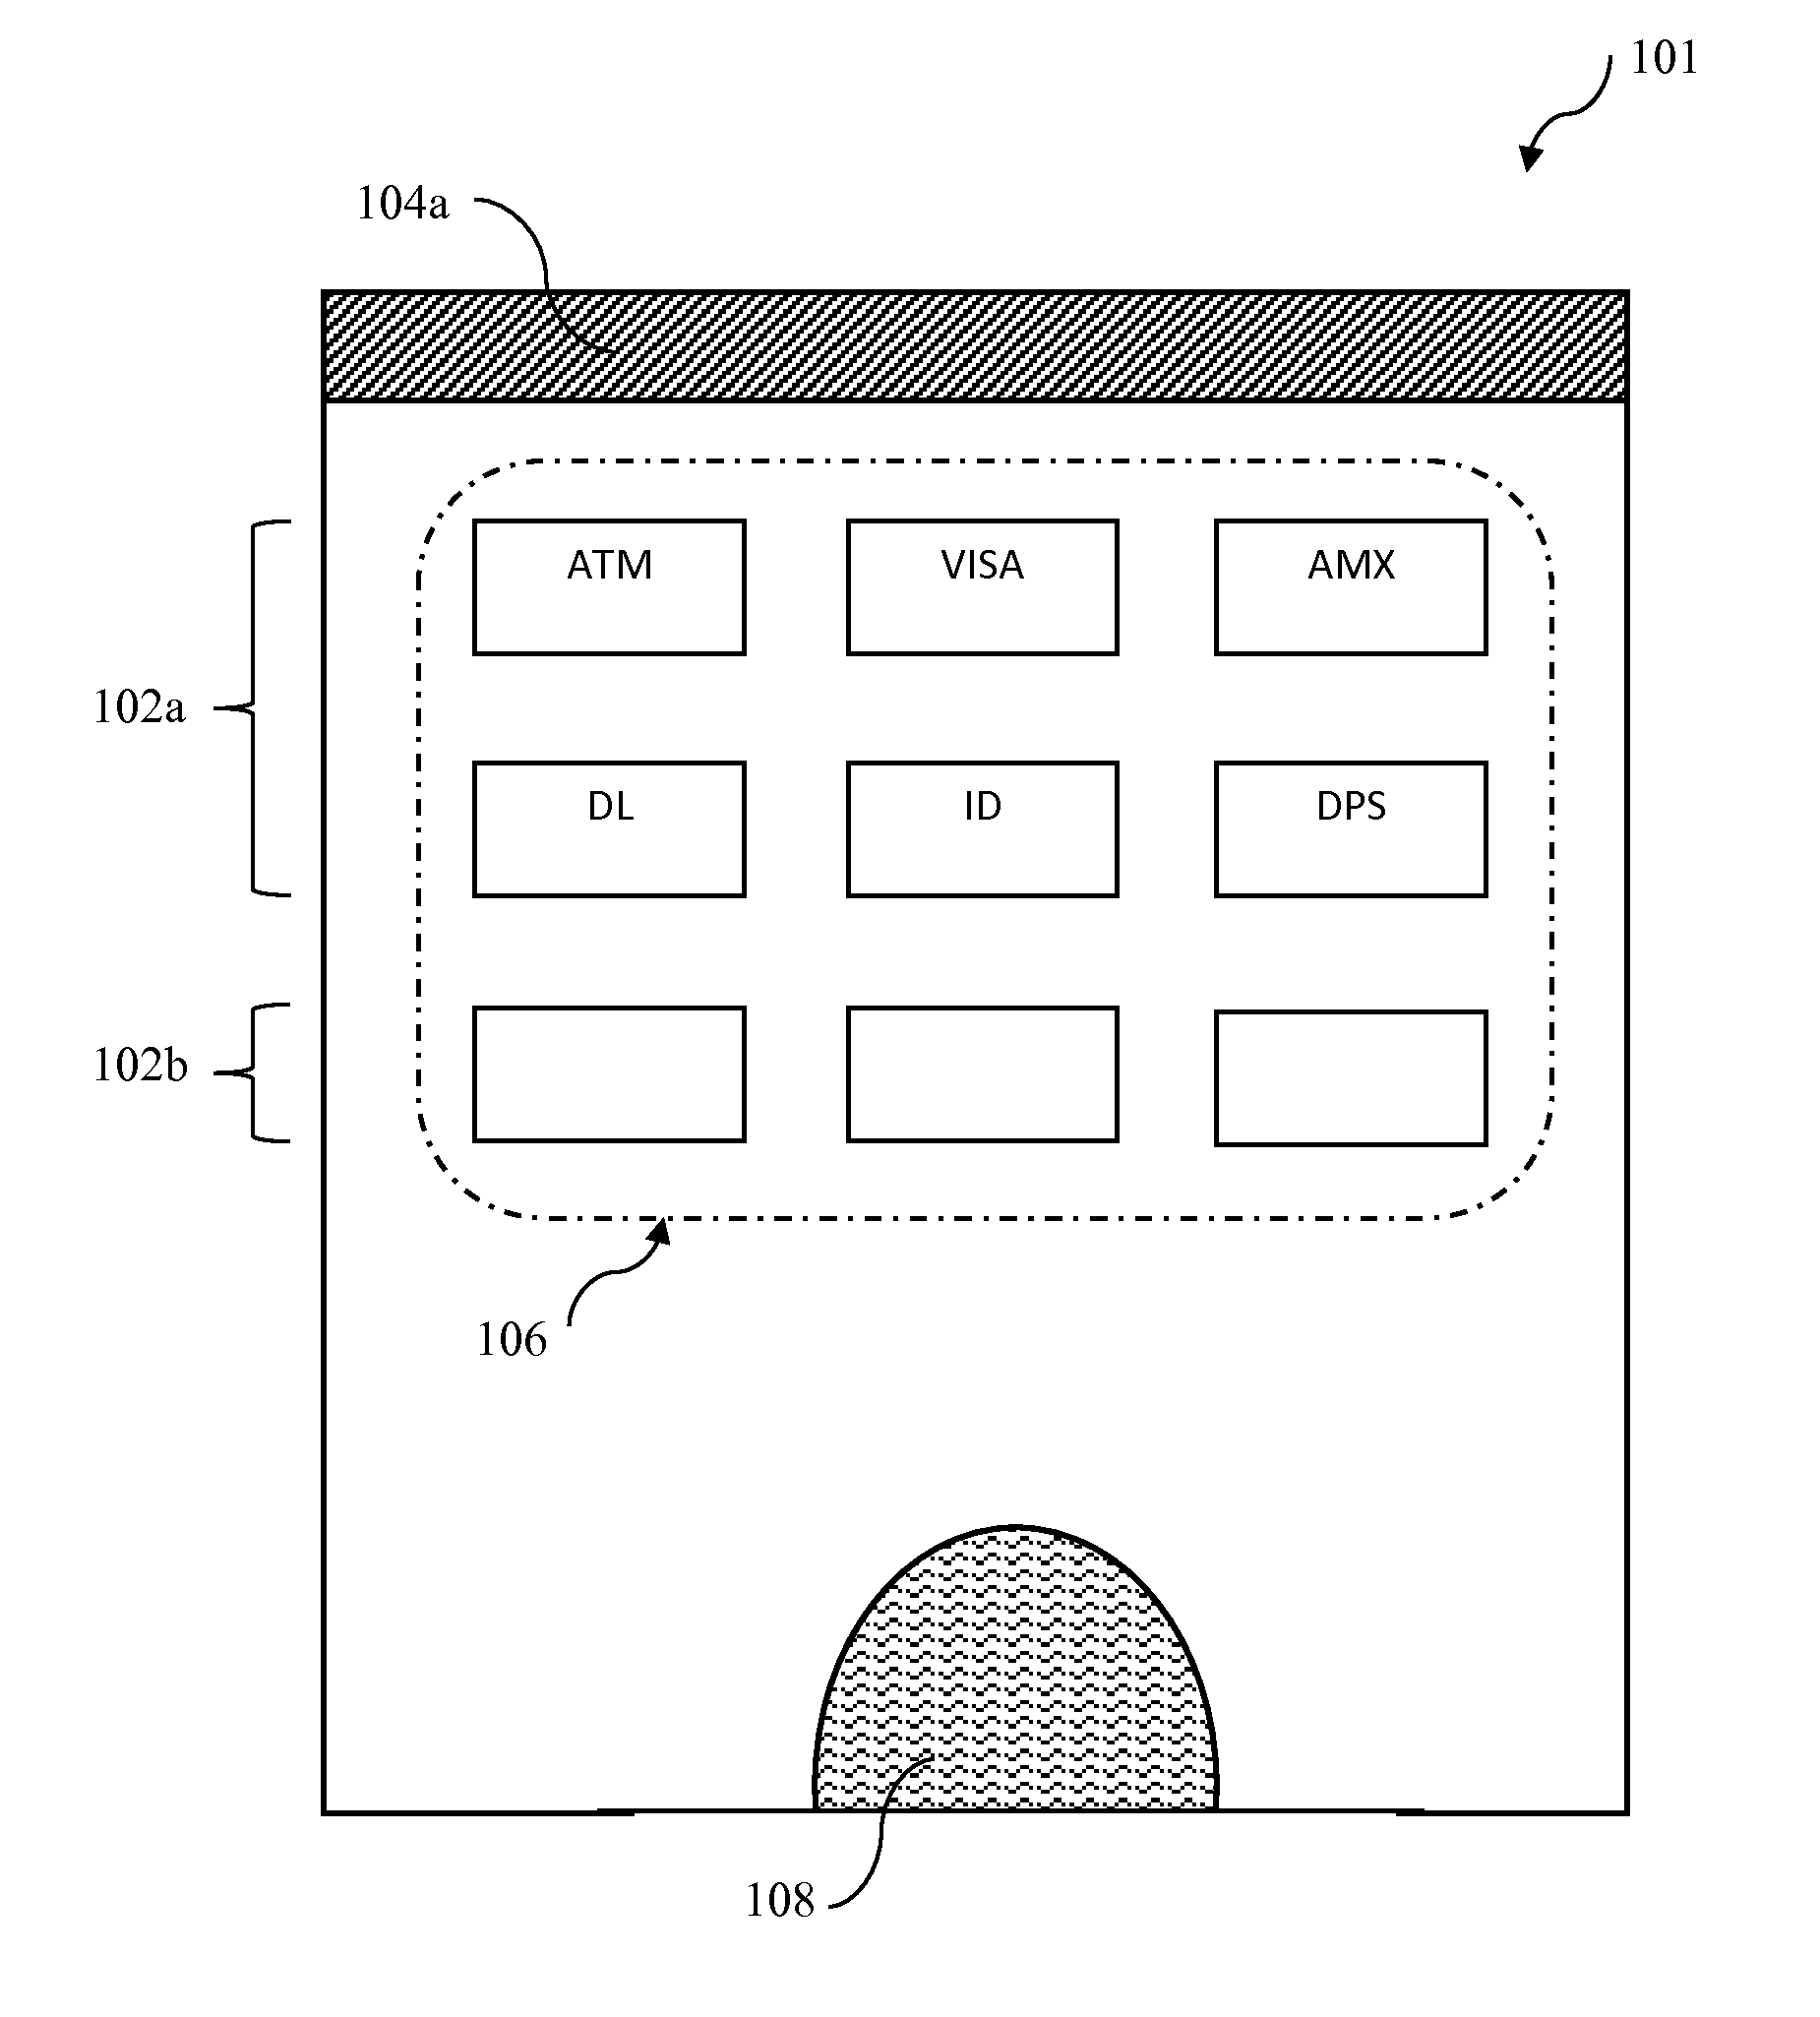 Digital card device and method